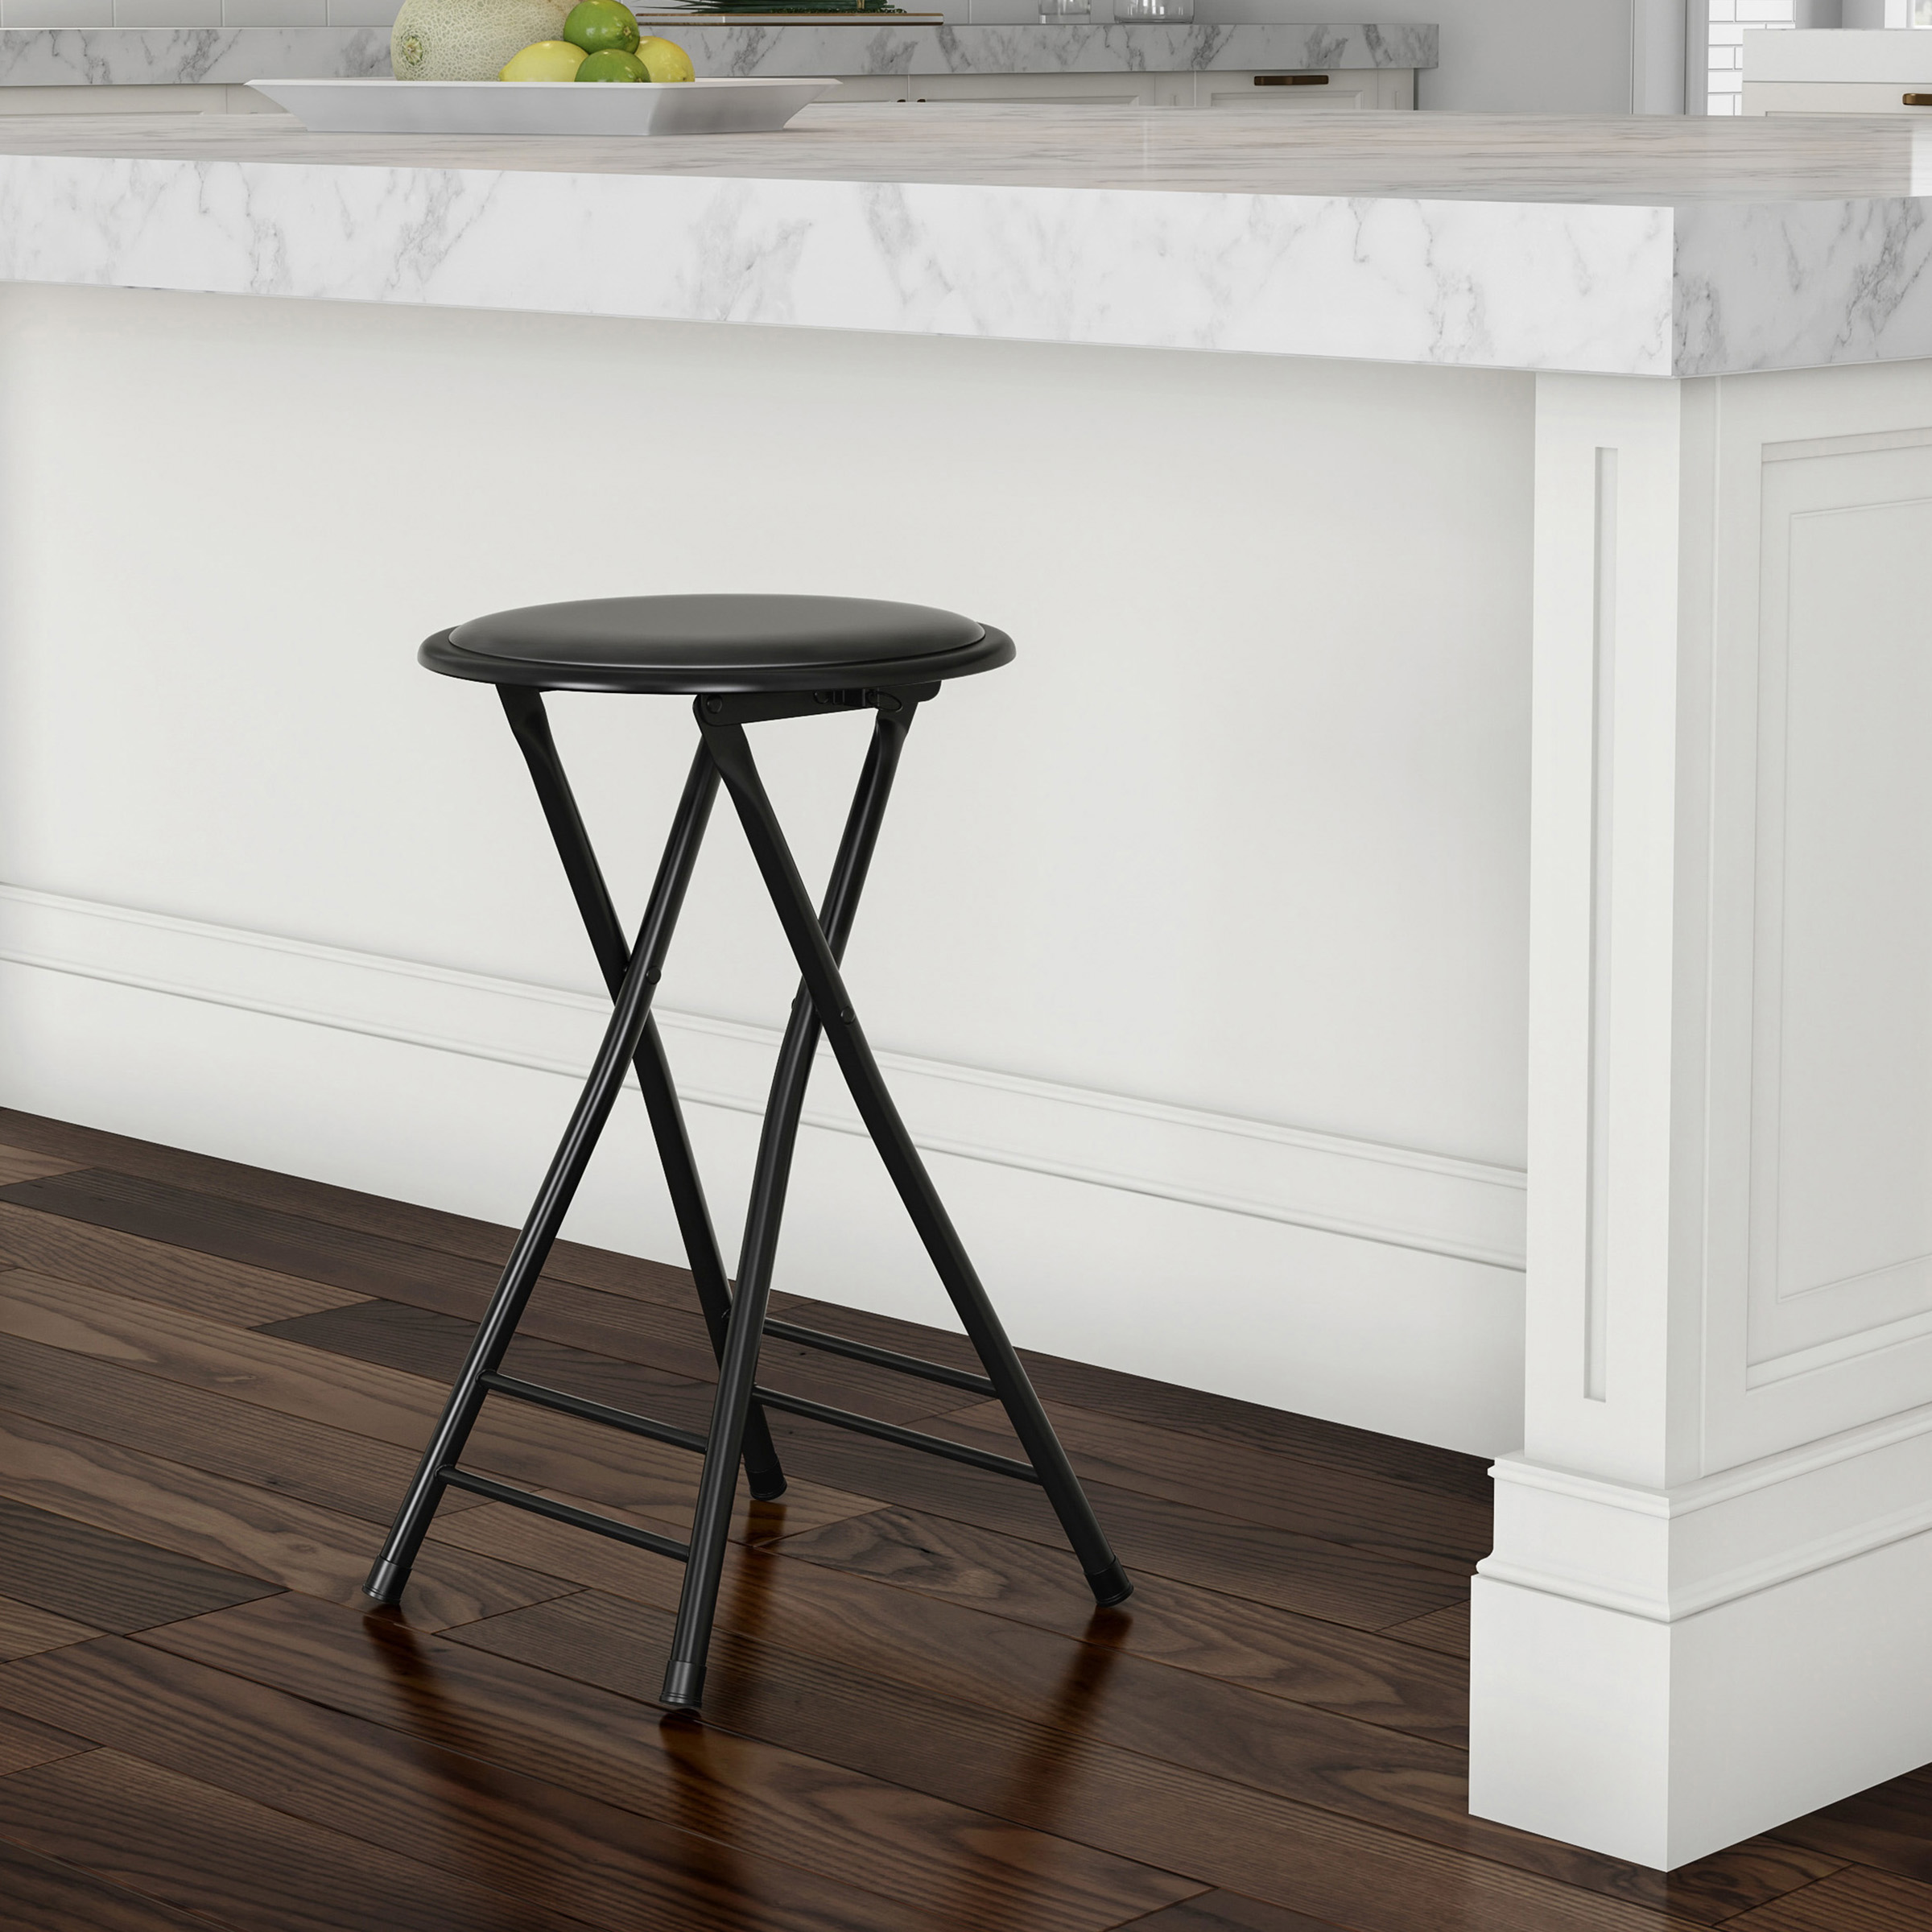 Trademark Home Backless 24-inch Folding Stool with 225lb Capacity (Black) - image 1 of 8